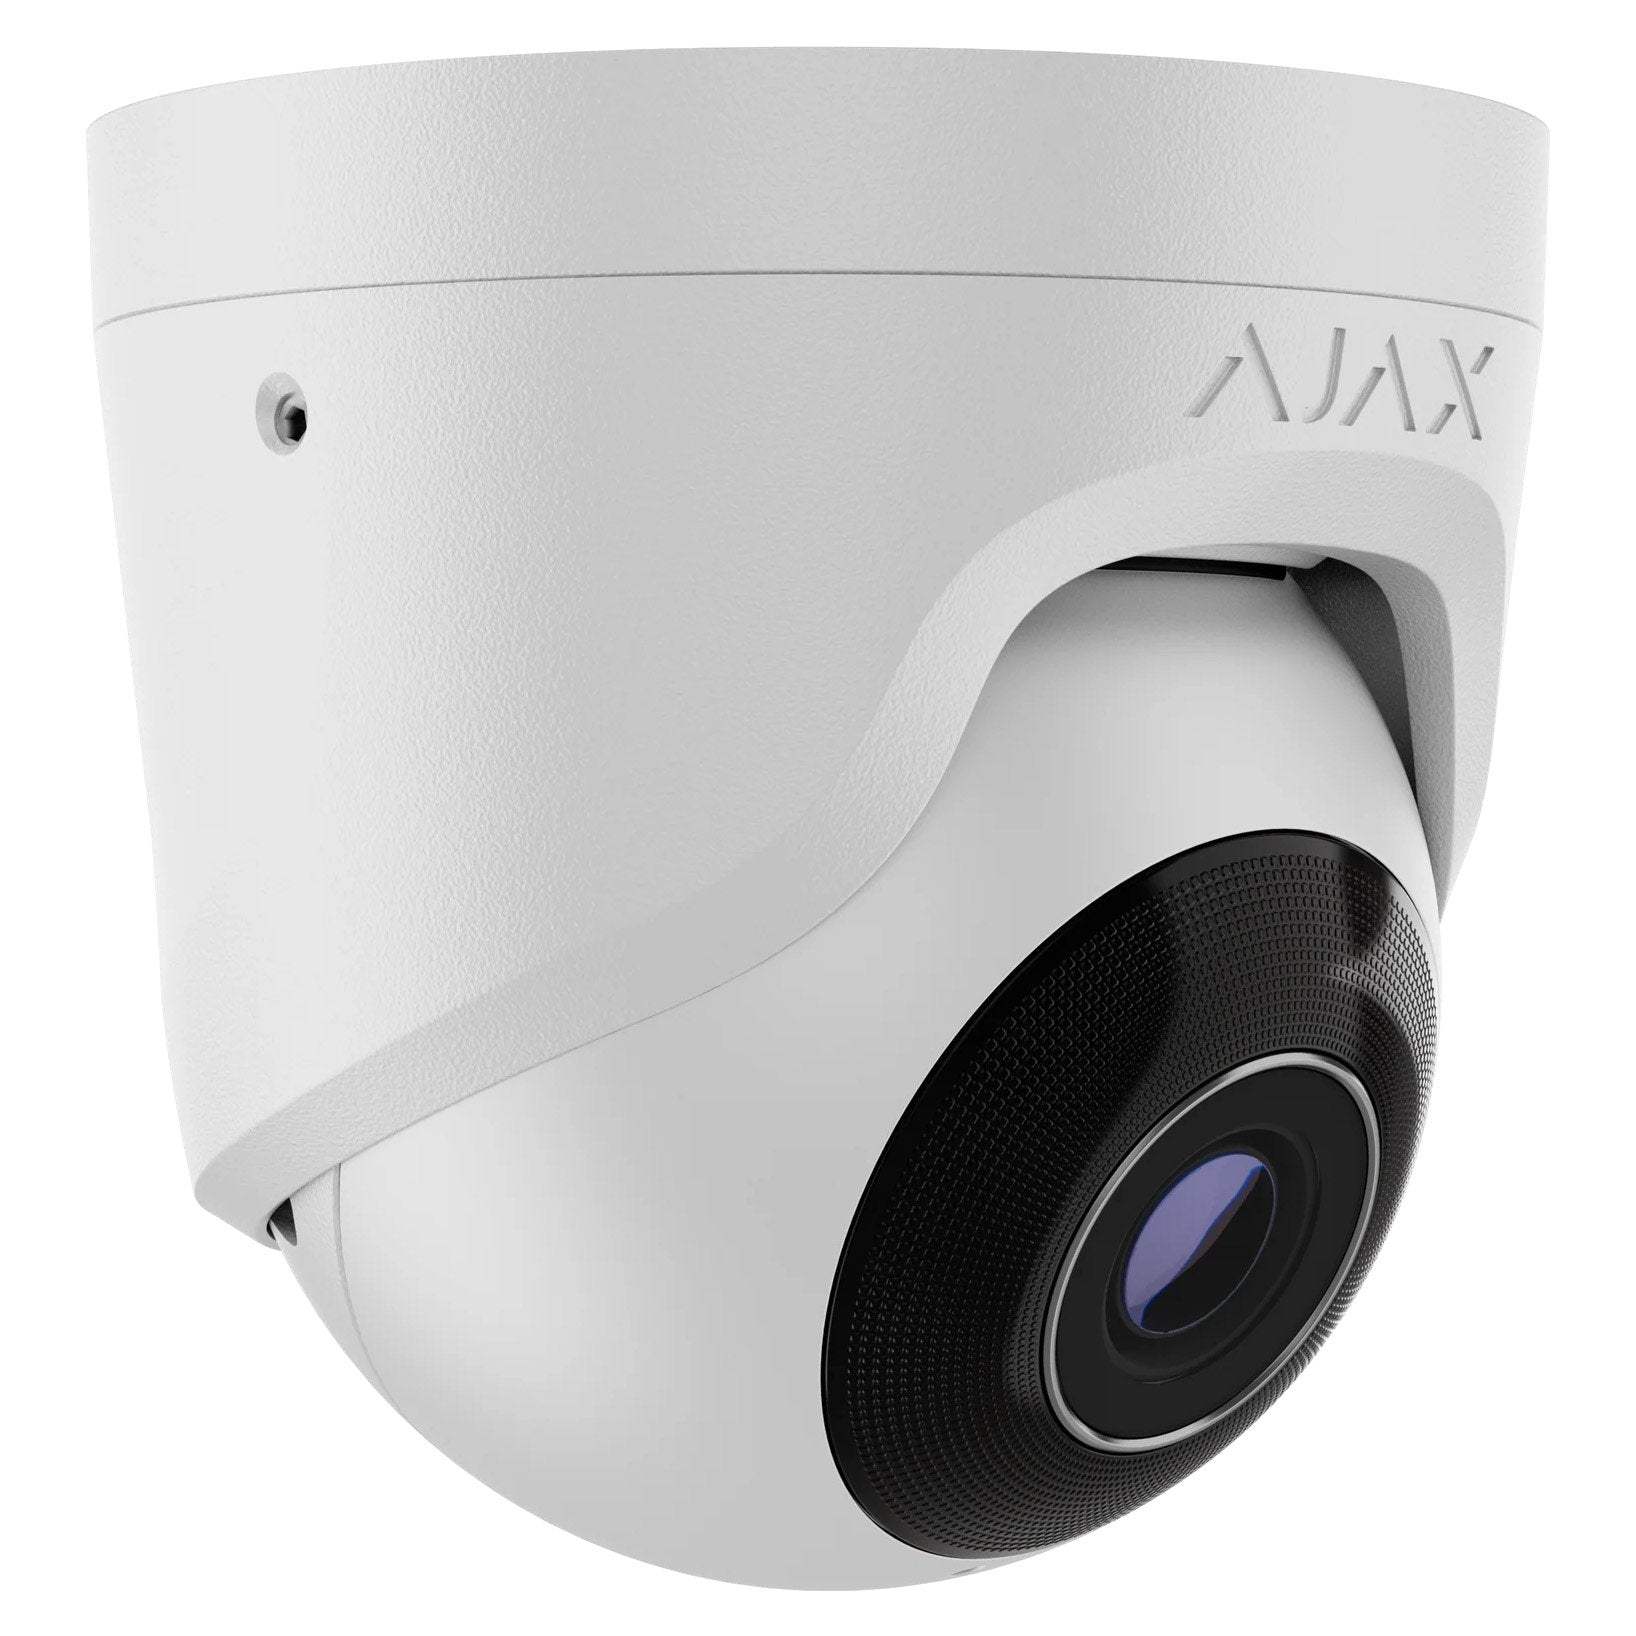 **SUPPLY DELAY (TBC)** Ajax 5MP IP Baseline AI Series IR Turret Camera, AI-Powered Object Recognition, 2.8mm, 120dB WDR, 35m IR, POE / 12VDC, IP65, MicroSD, Built-in Mic